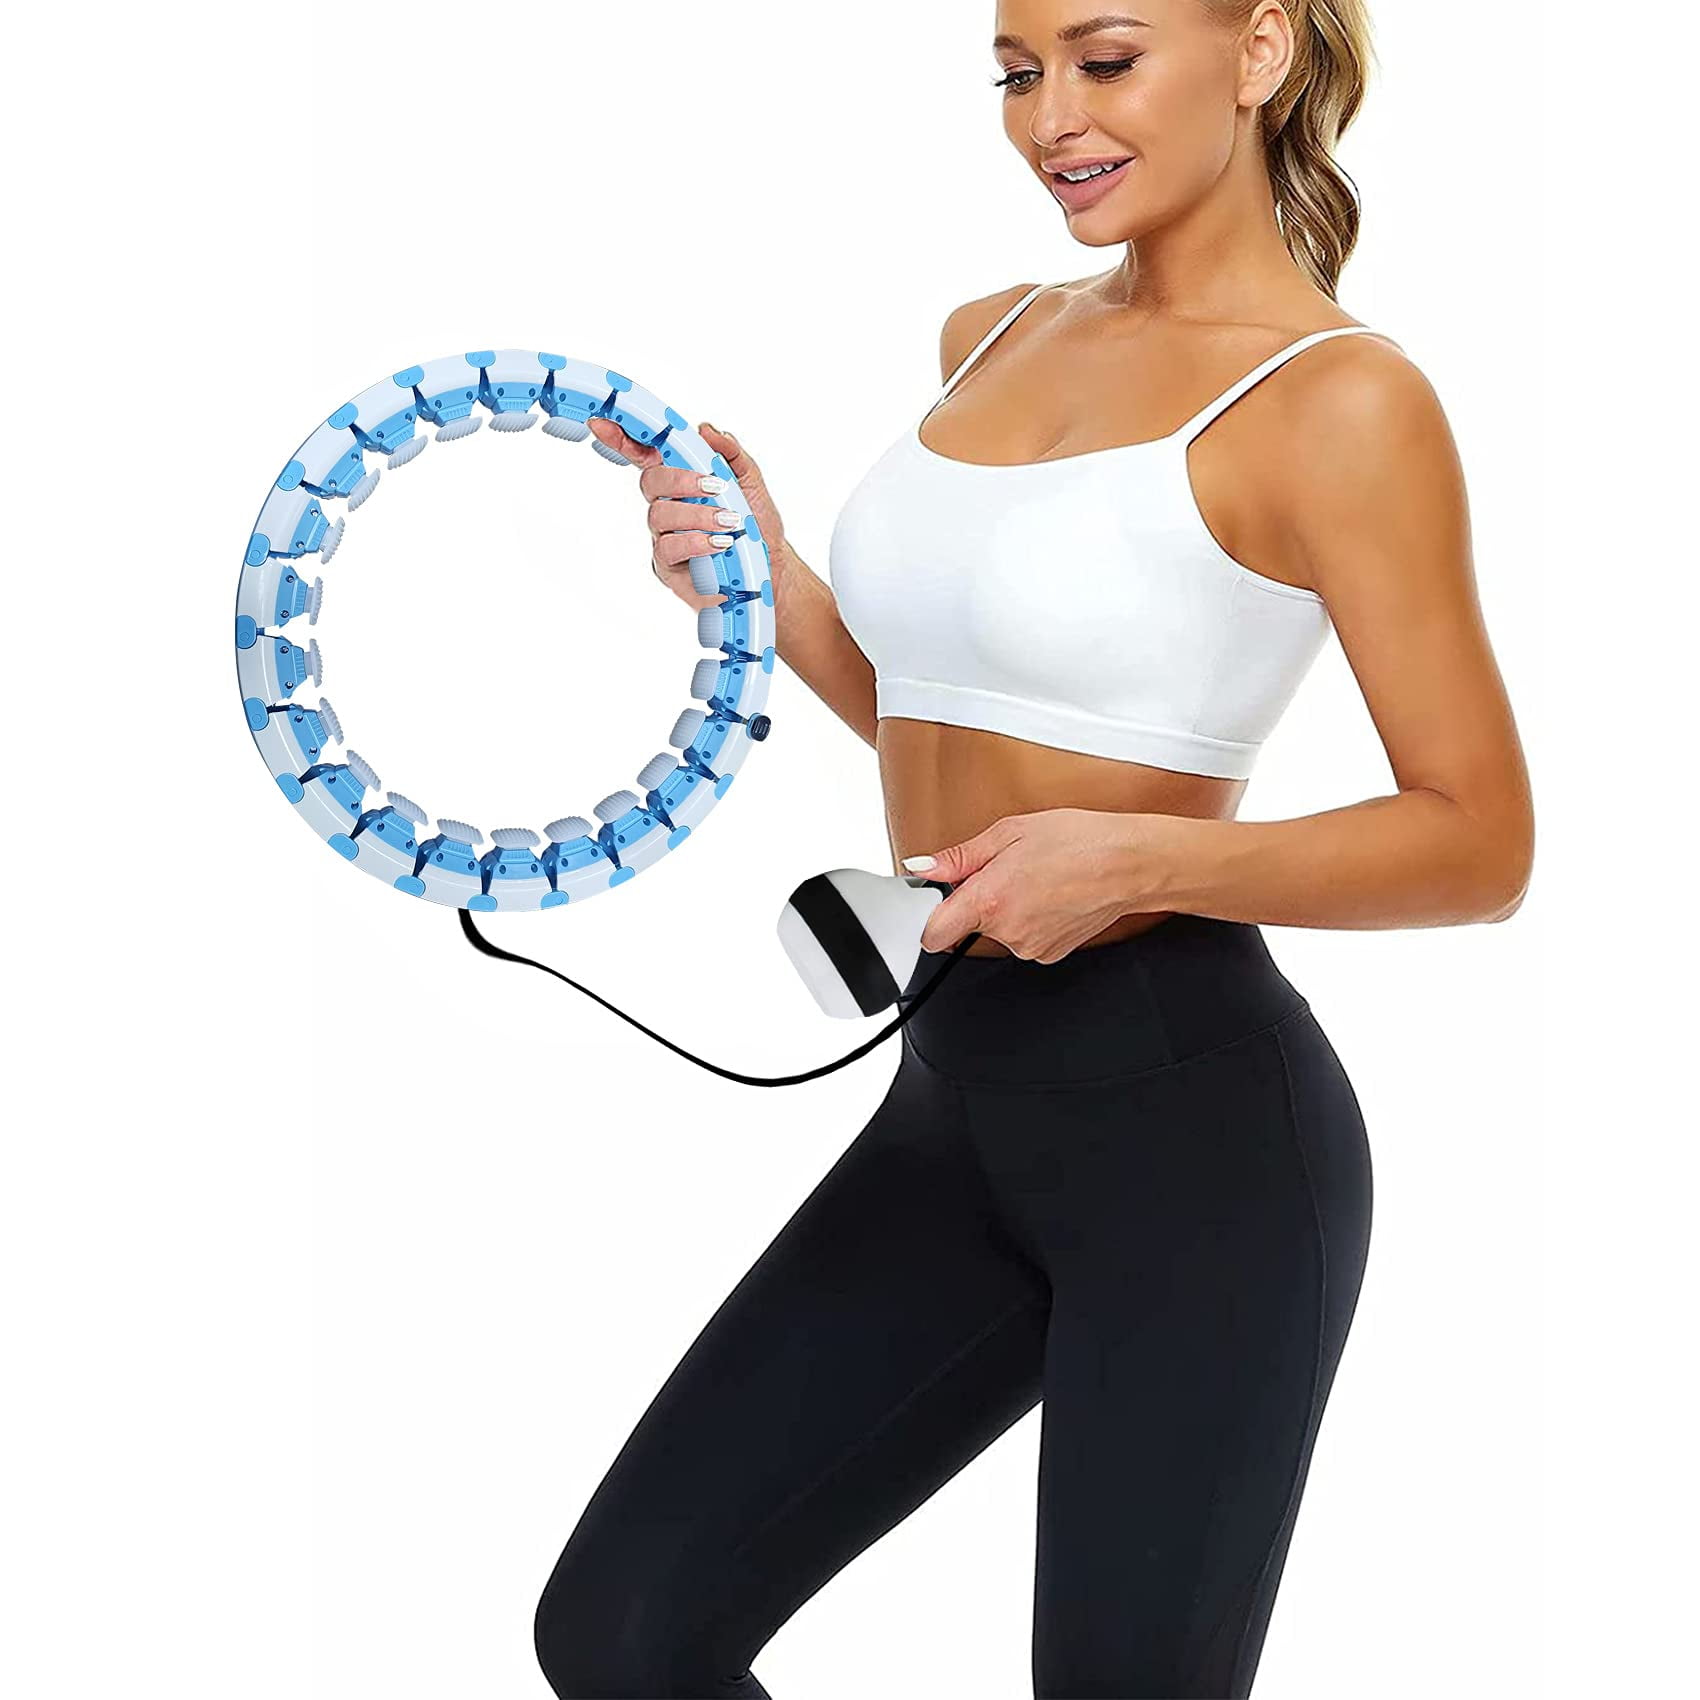 Hula Hoops for Adults 360 Degree Abdomen Fitness Massage Workout Weight Loss Hula Hoop for Women Non-Fall Exercise Hoop with 24 Detachable Knots Adjustable Auto-Spinning Ball 